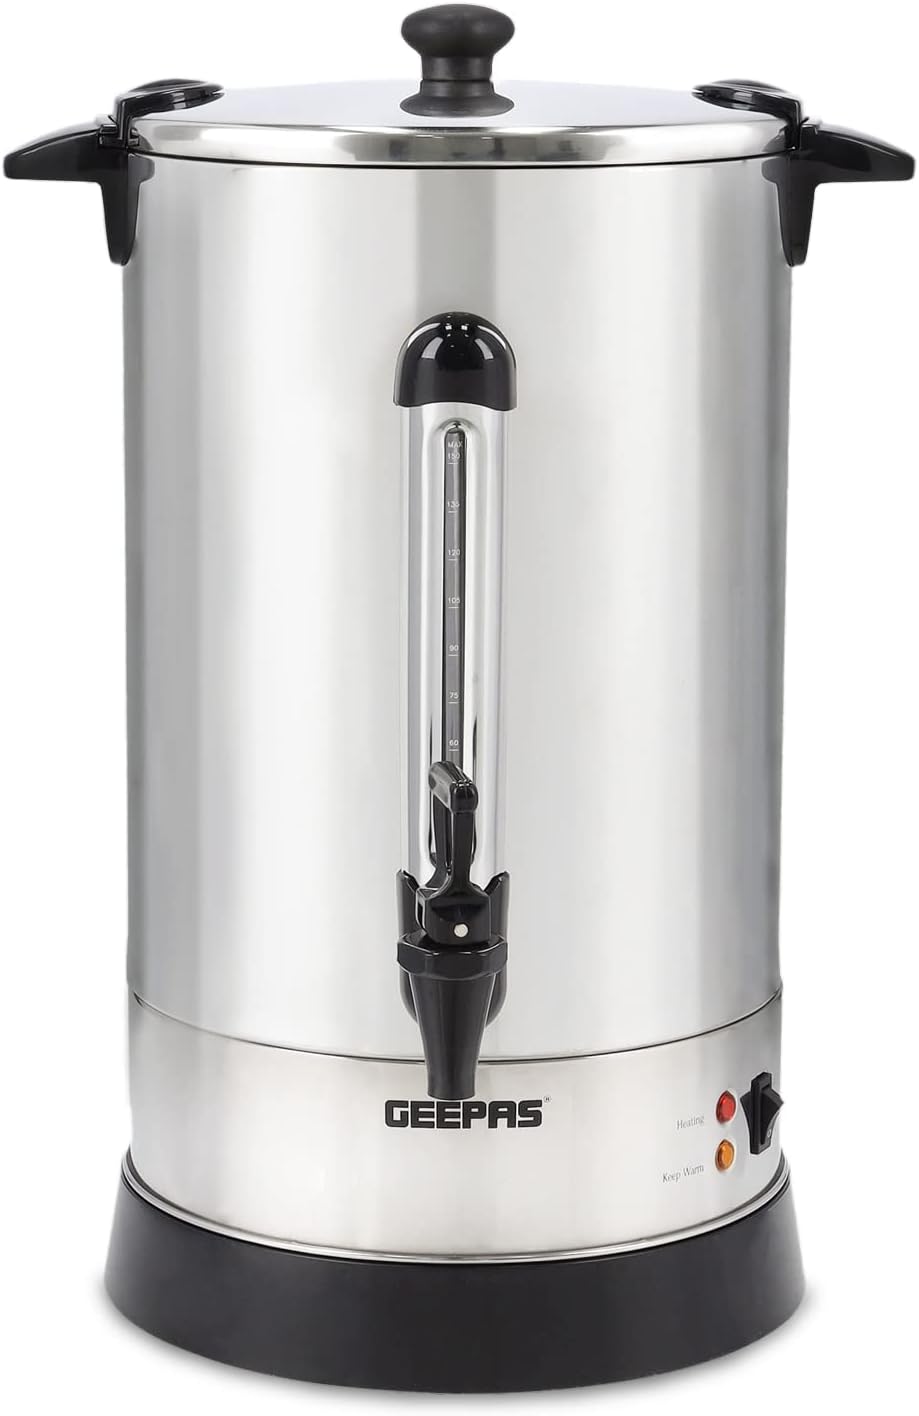 Kettle from Geepas, stainless steel, silver color, 20 liters, model Gk38048